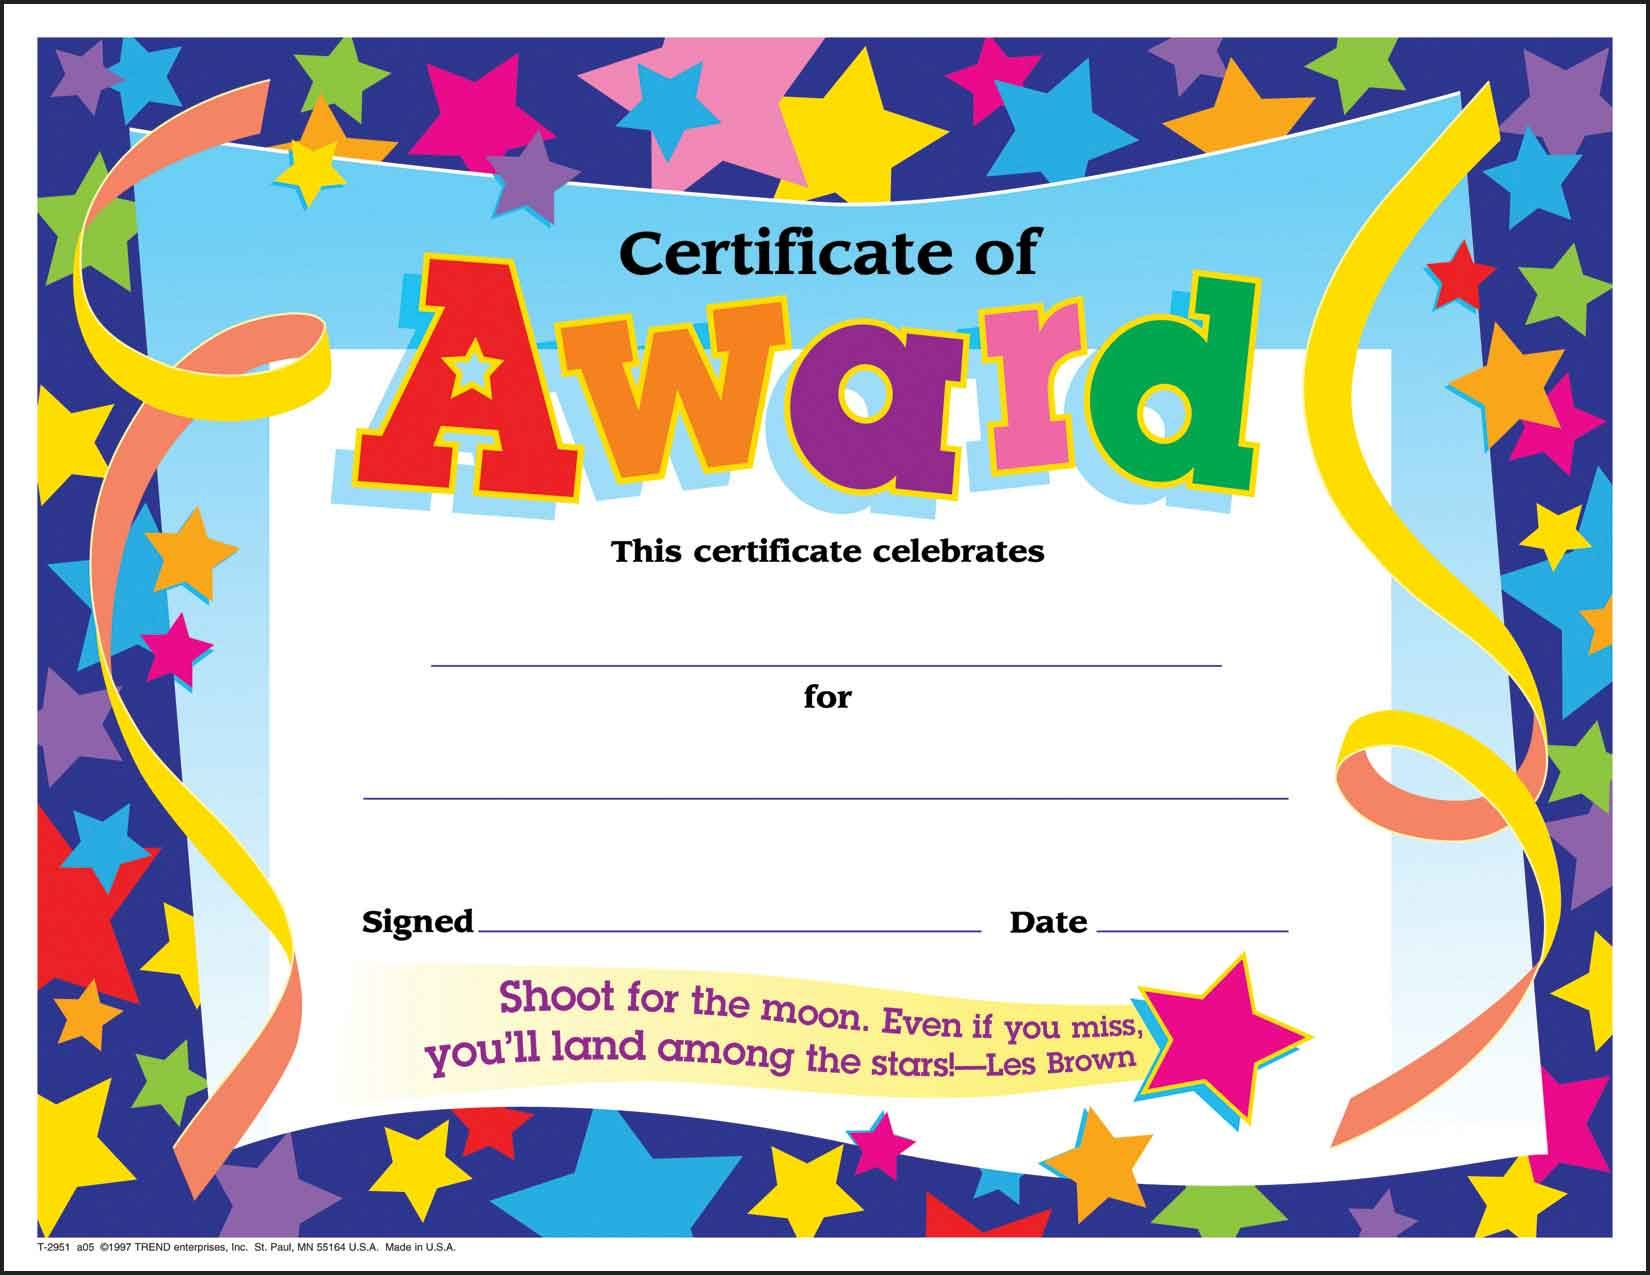 Certificate Template For Kids Free Certificate Templates - Free Printable Student Award Certificate Template